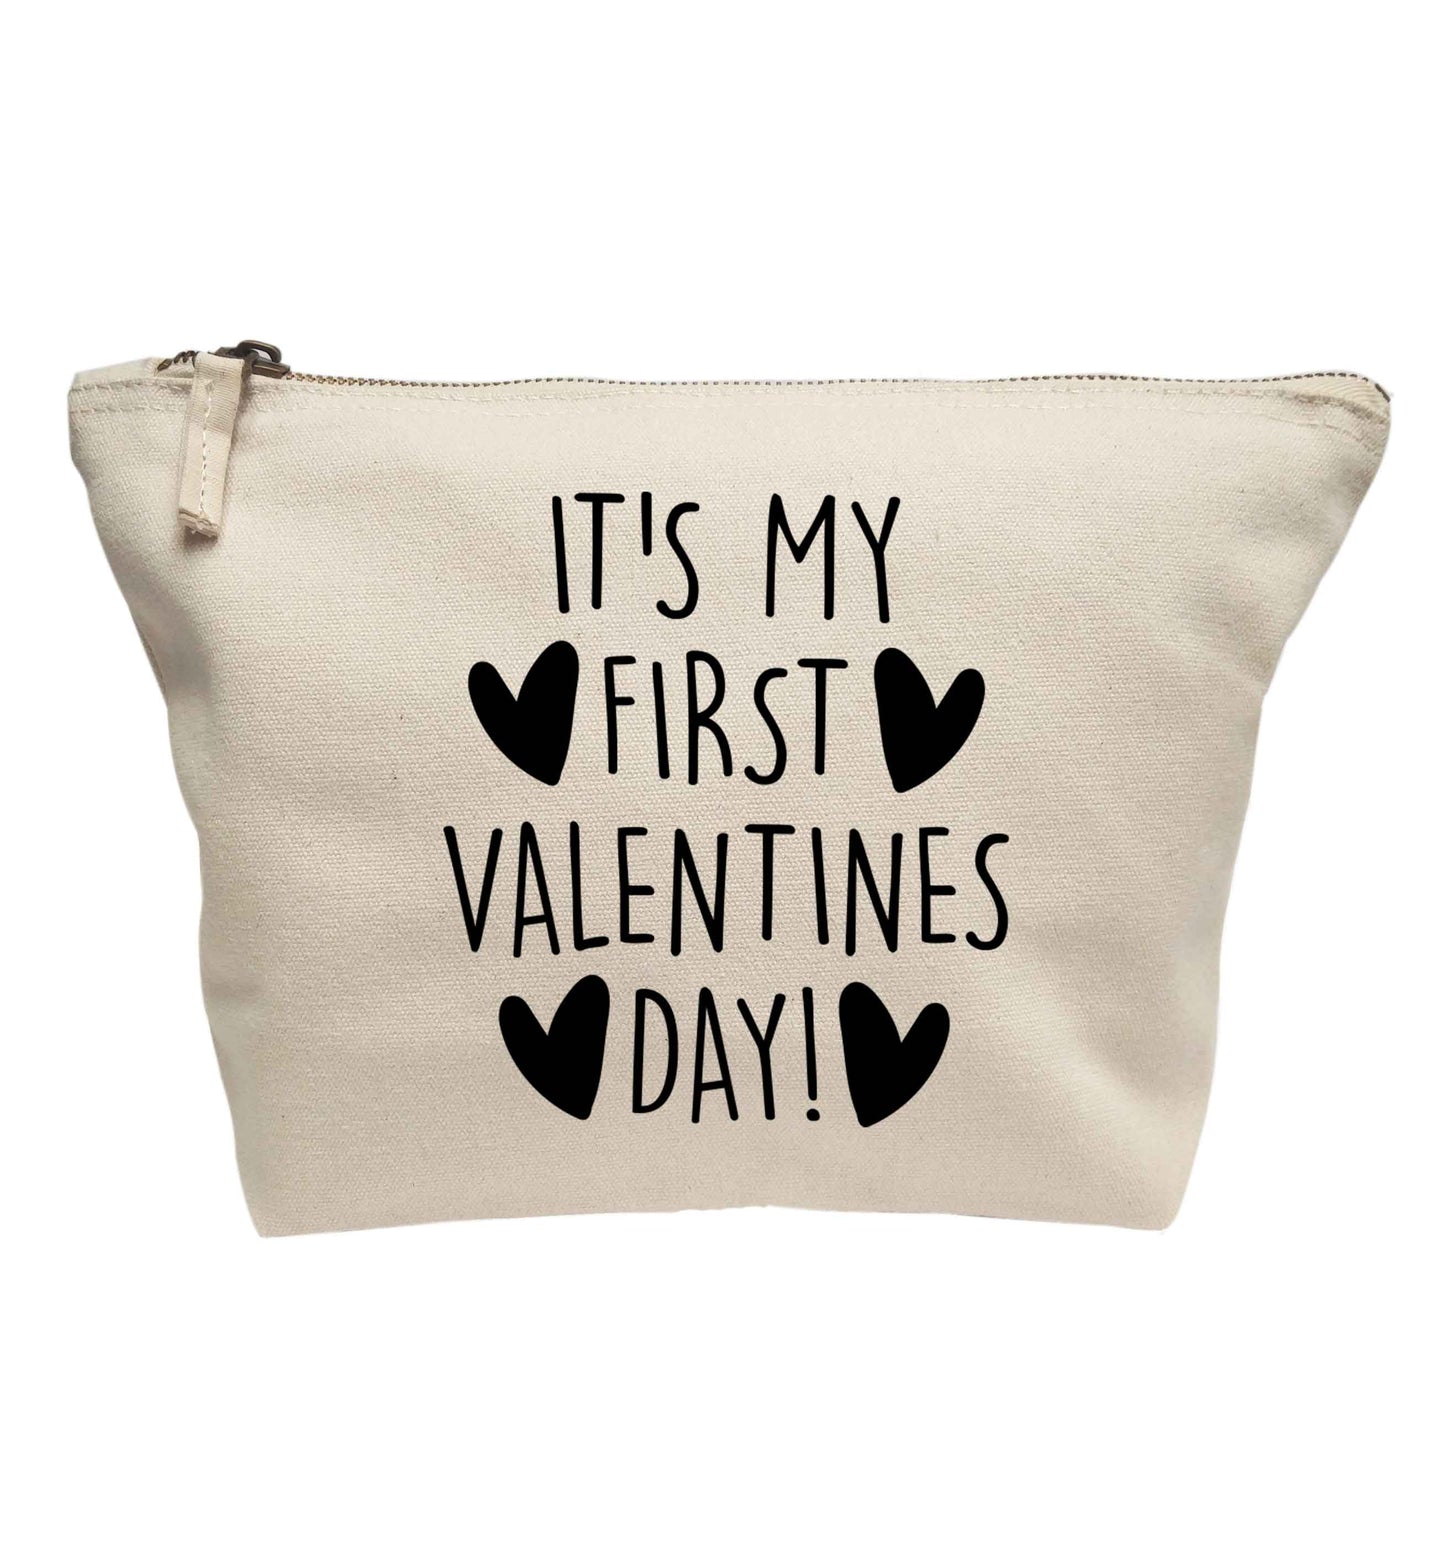 It's my first valentines day! | Makeup / wash bag